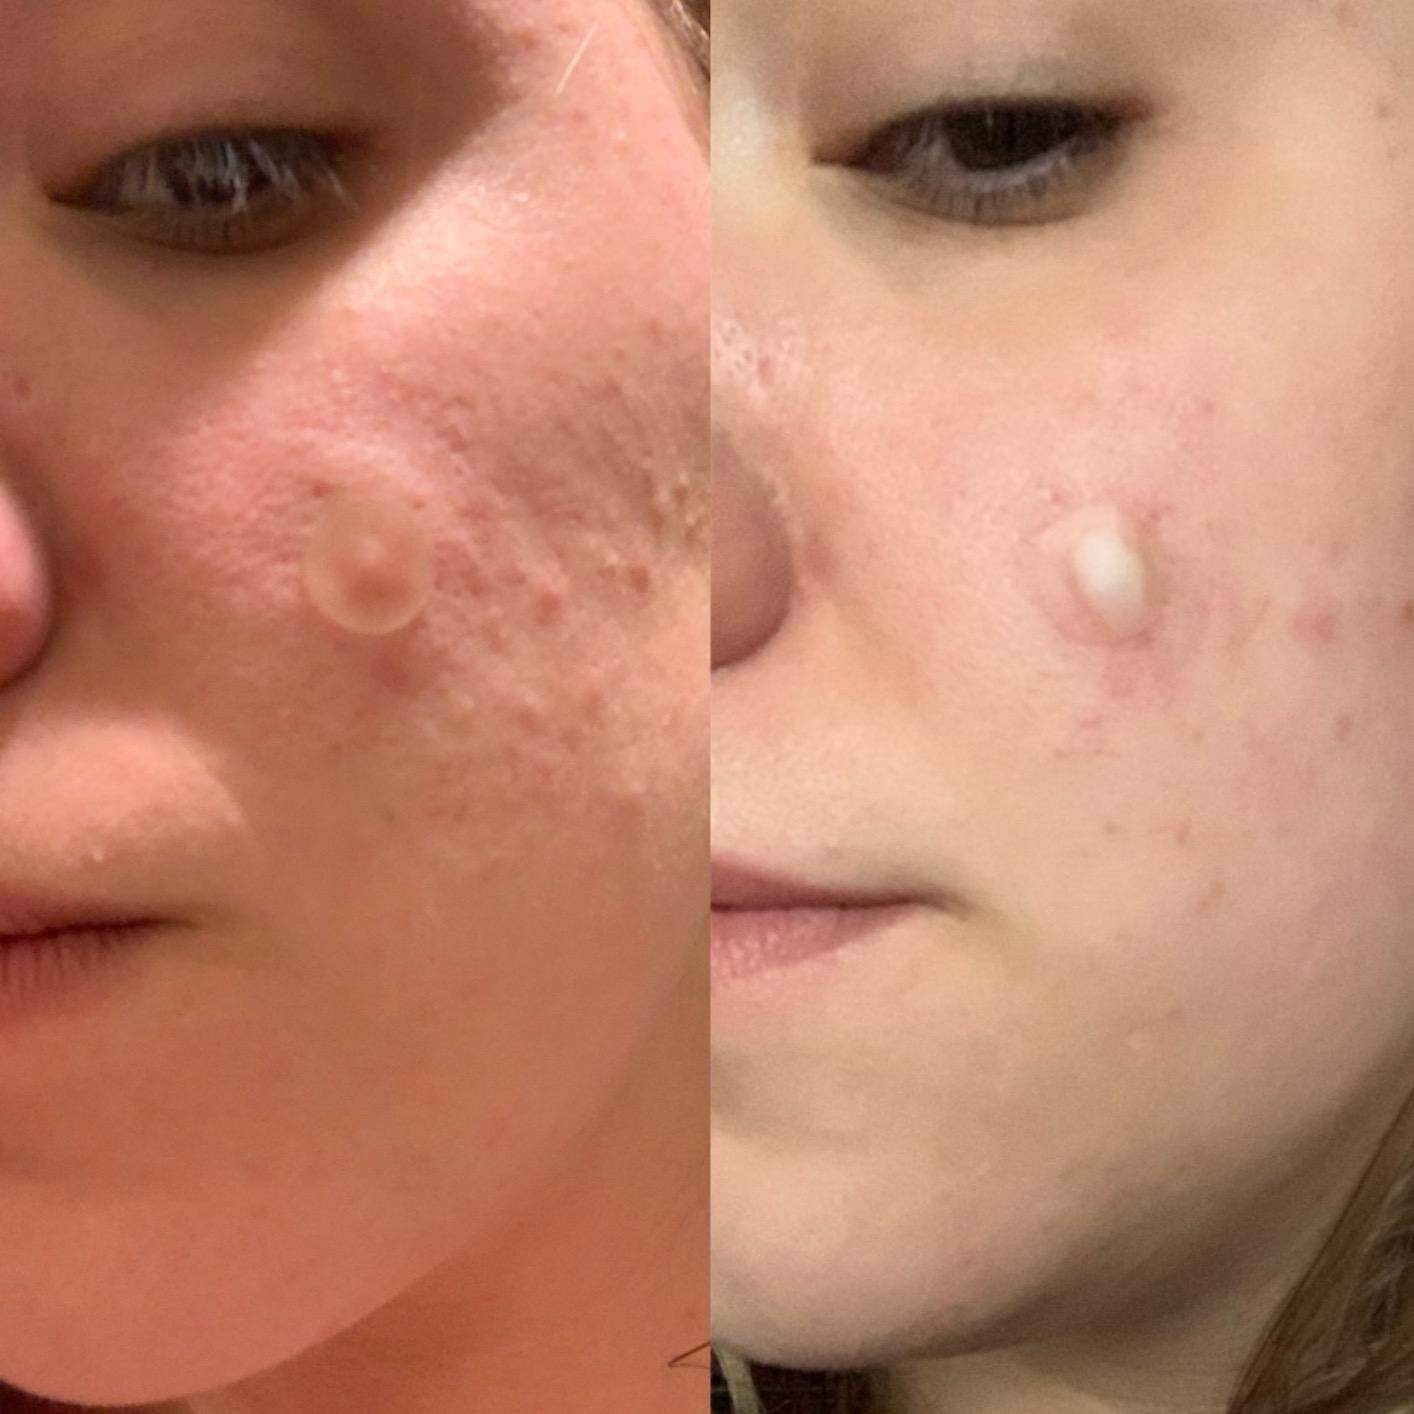 on the left, a reviewer with a pimple patch applied on their check and, on the right, the same pimple patch now covered with puss extracted from the blemish